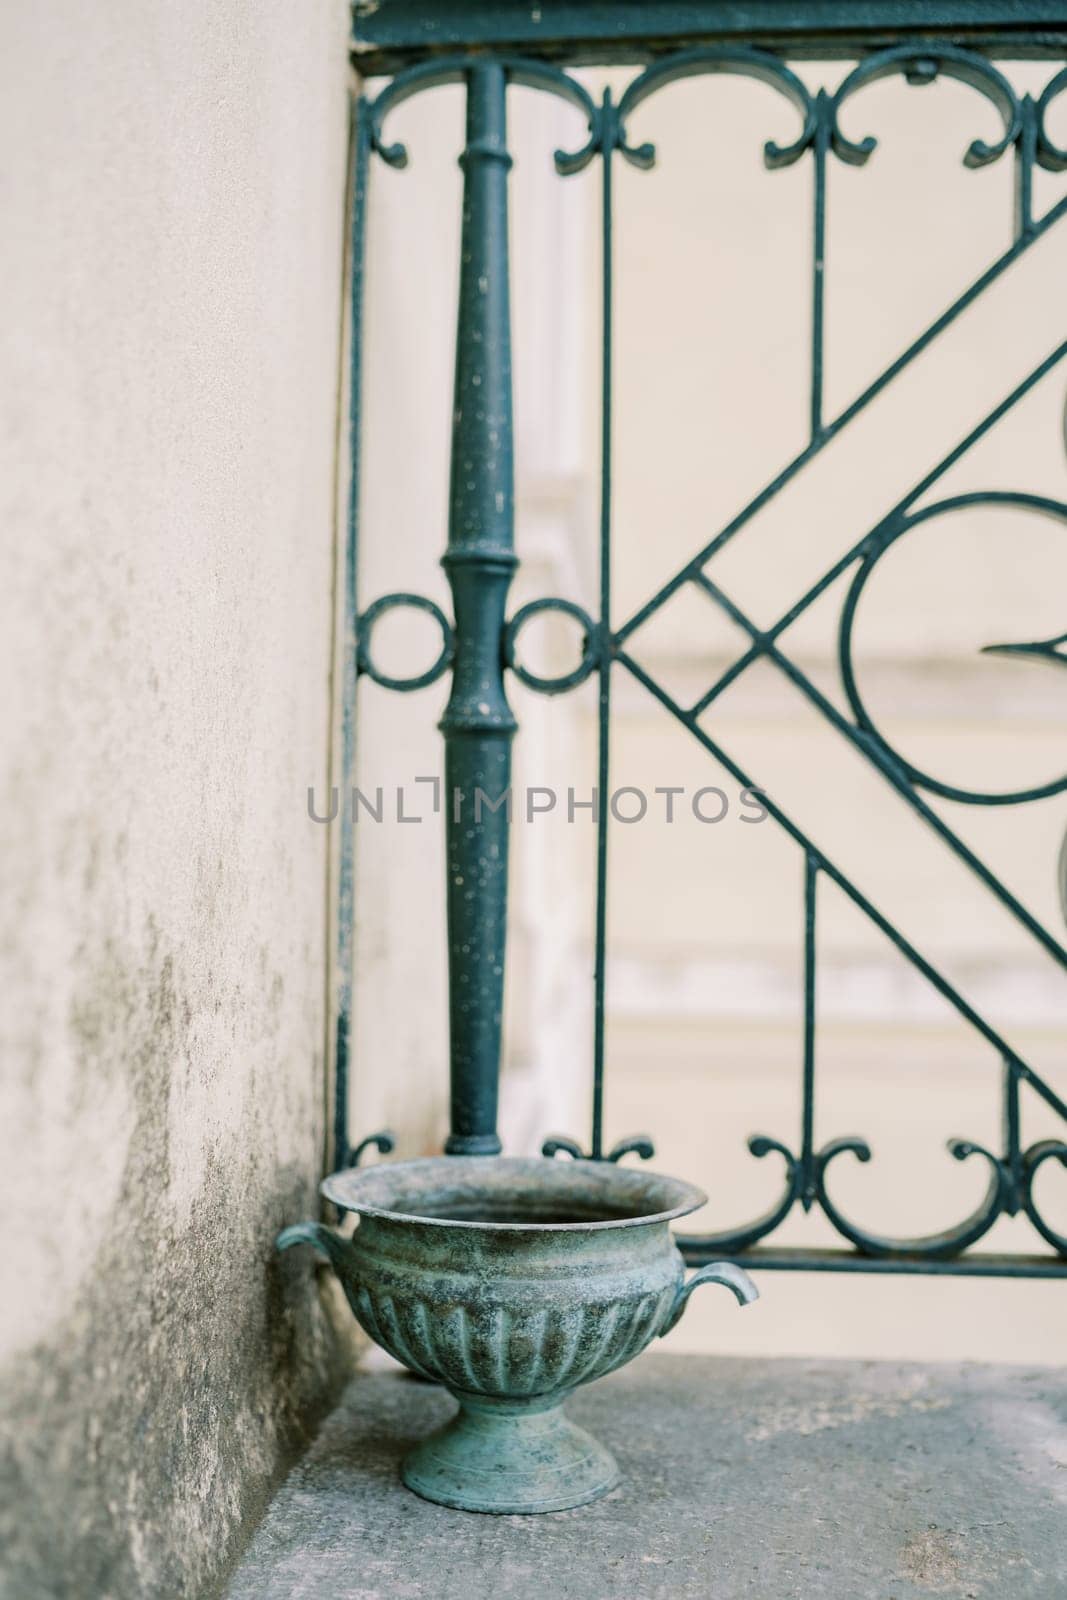 Antique bronze vase stands on the balcony near the wrought iron fence. High quality photo